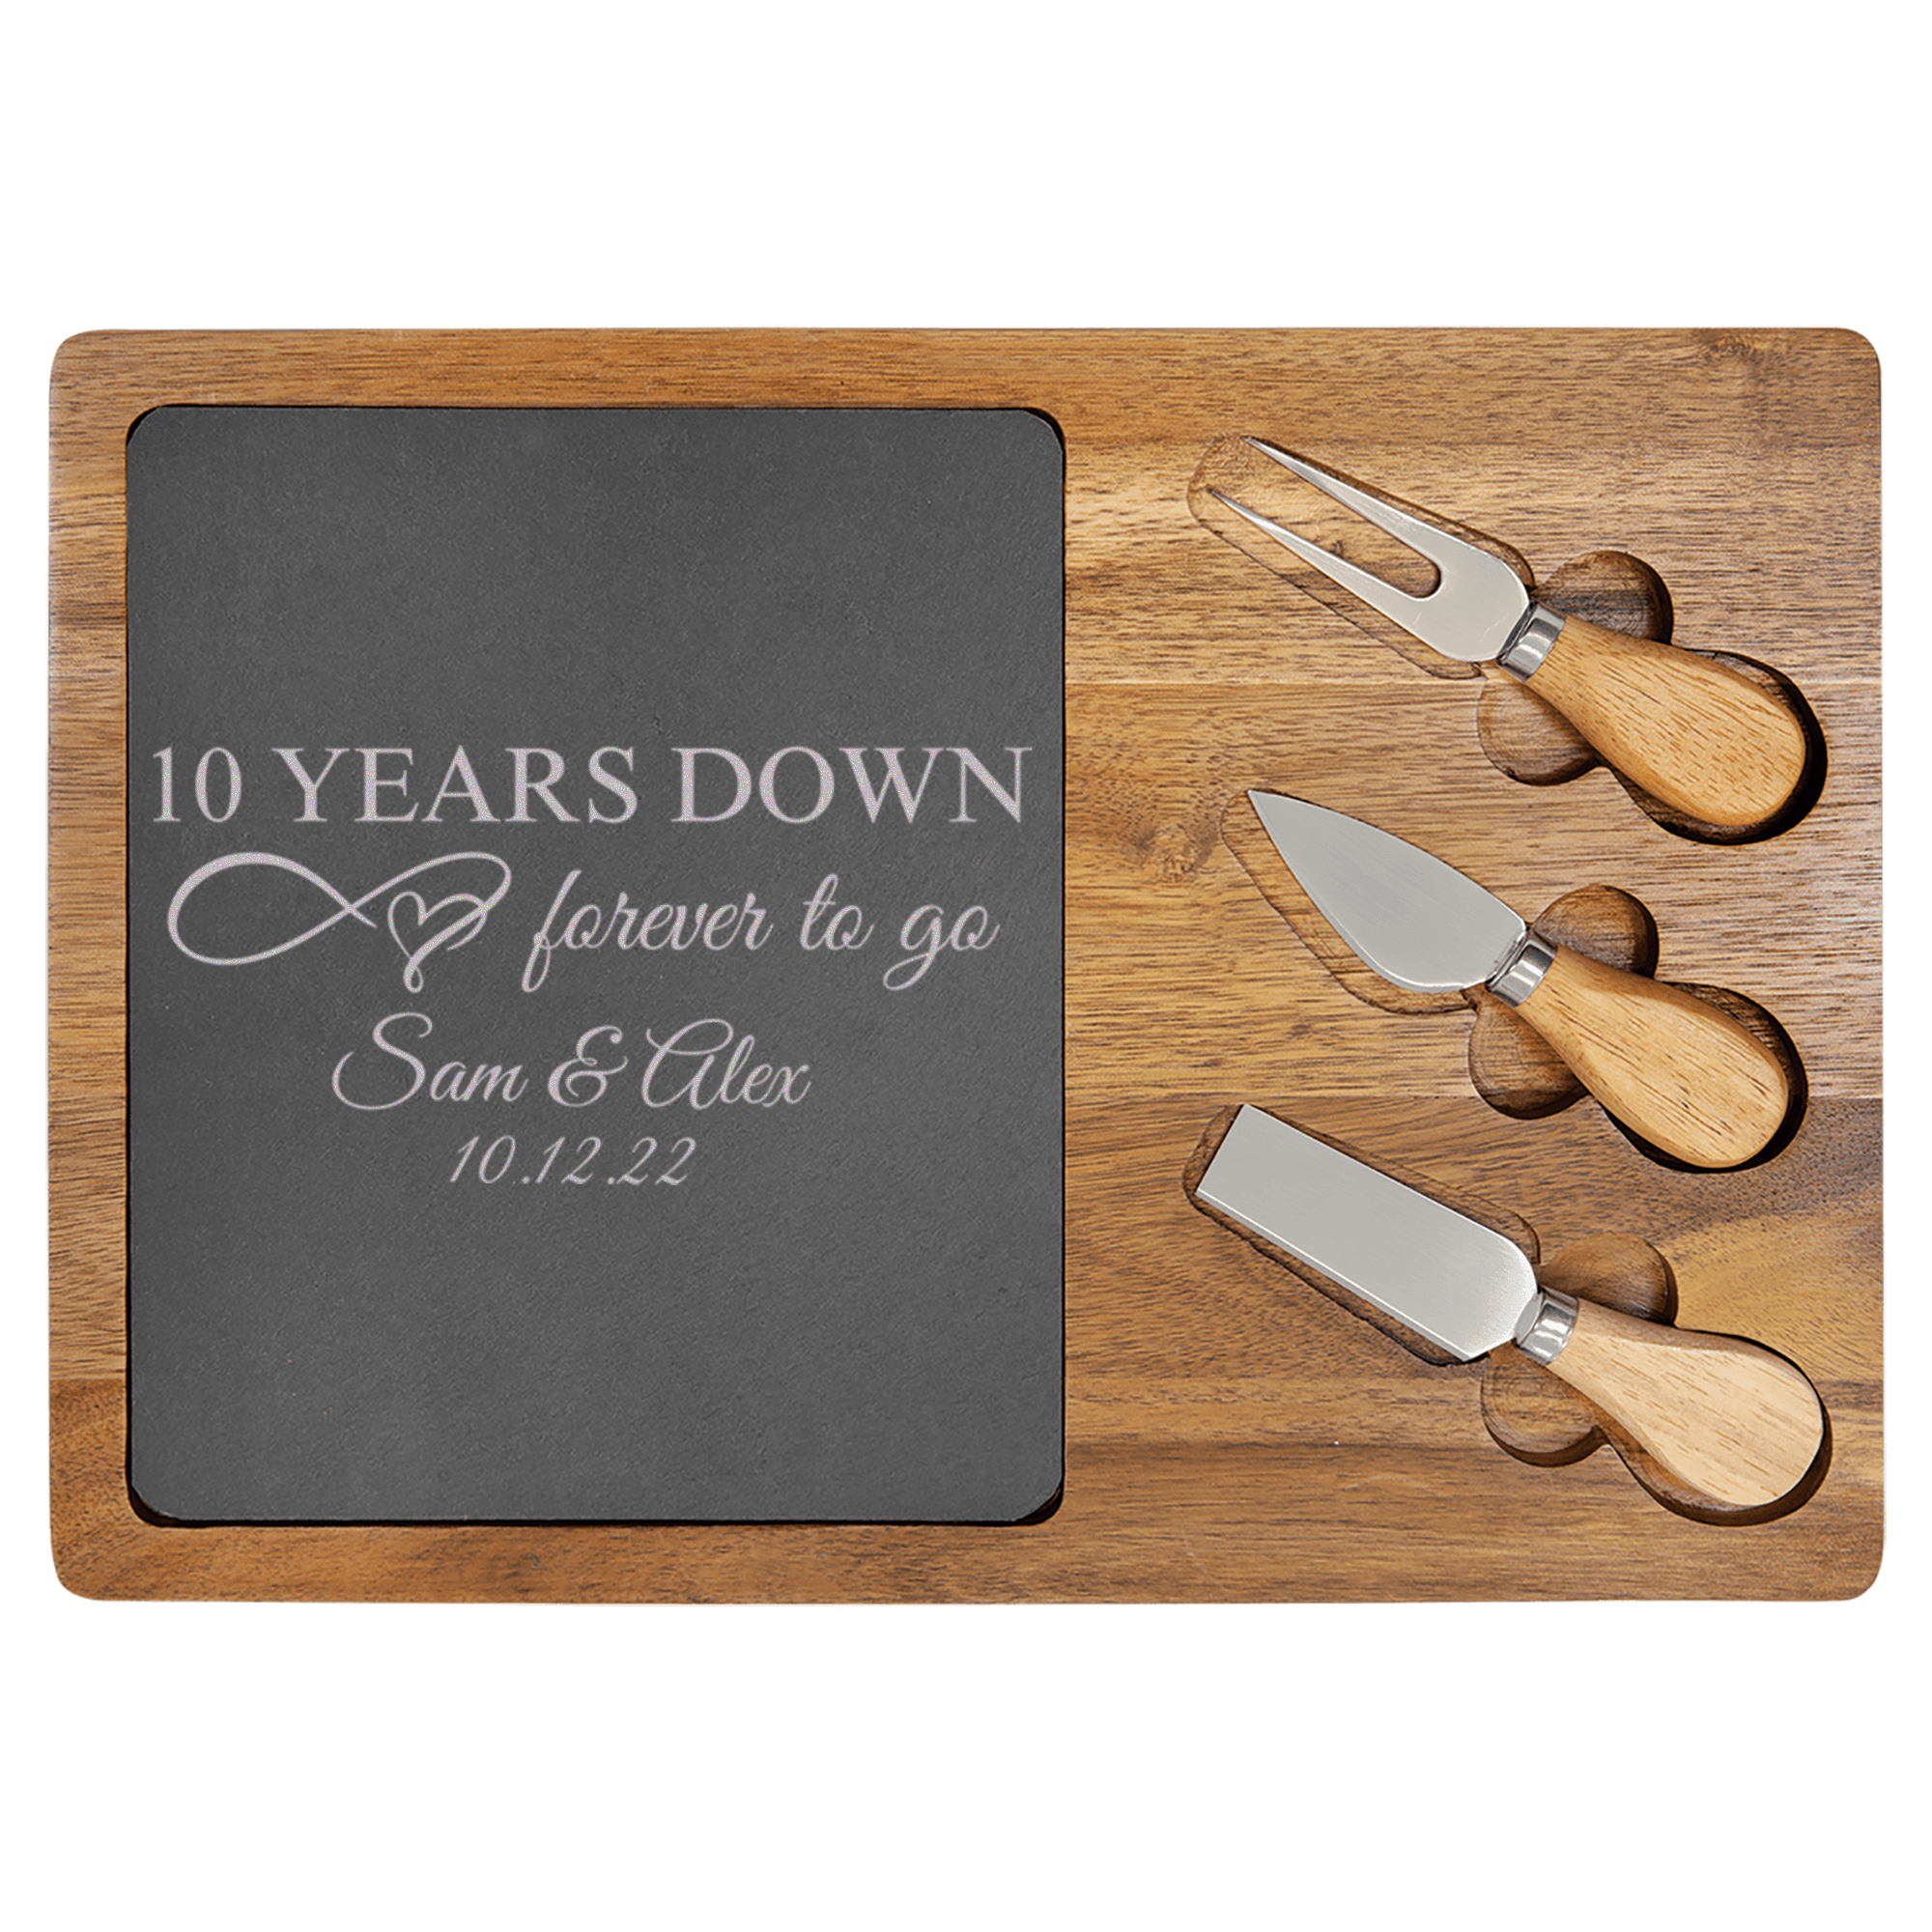 10 Years Down Wood Slate Serving Tray